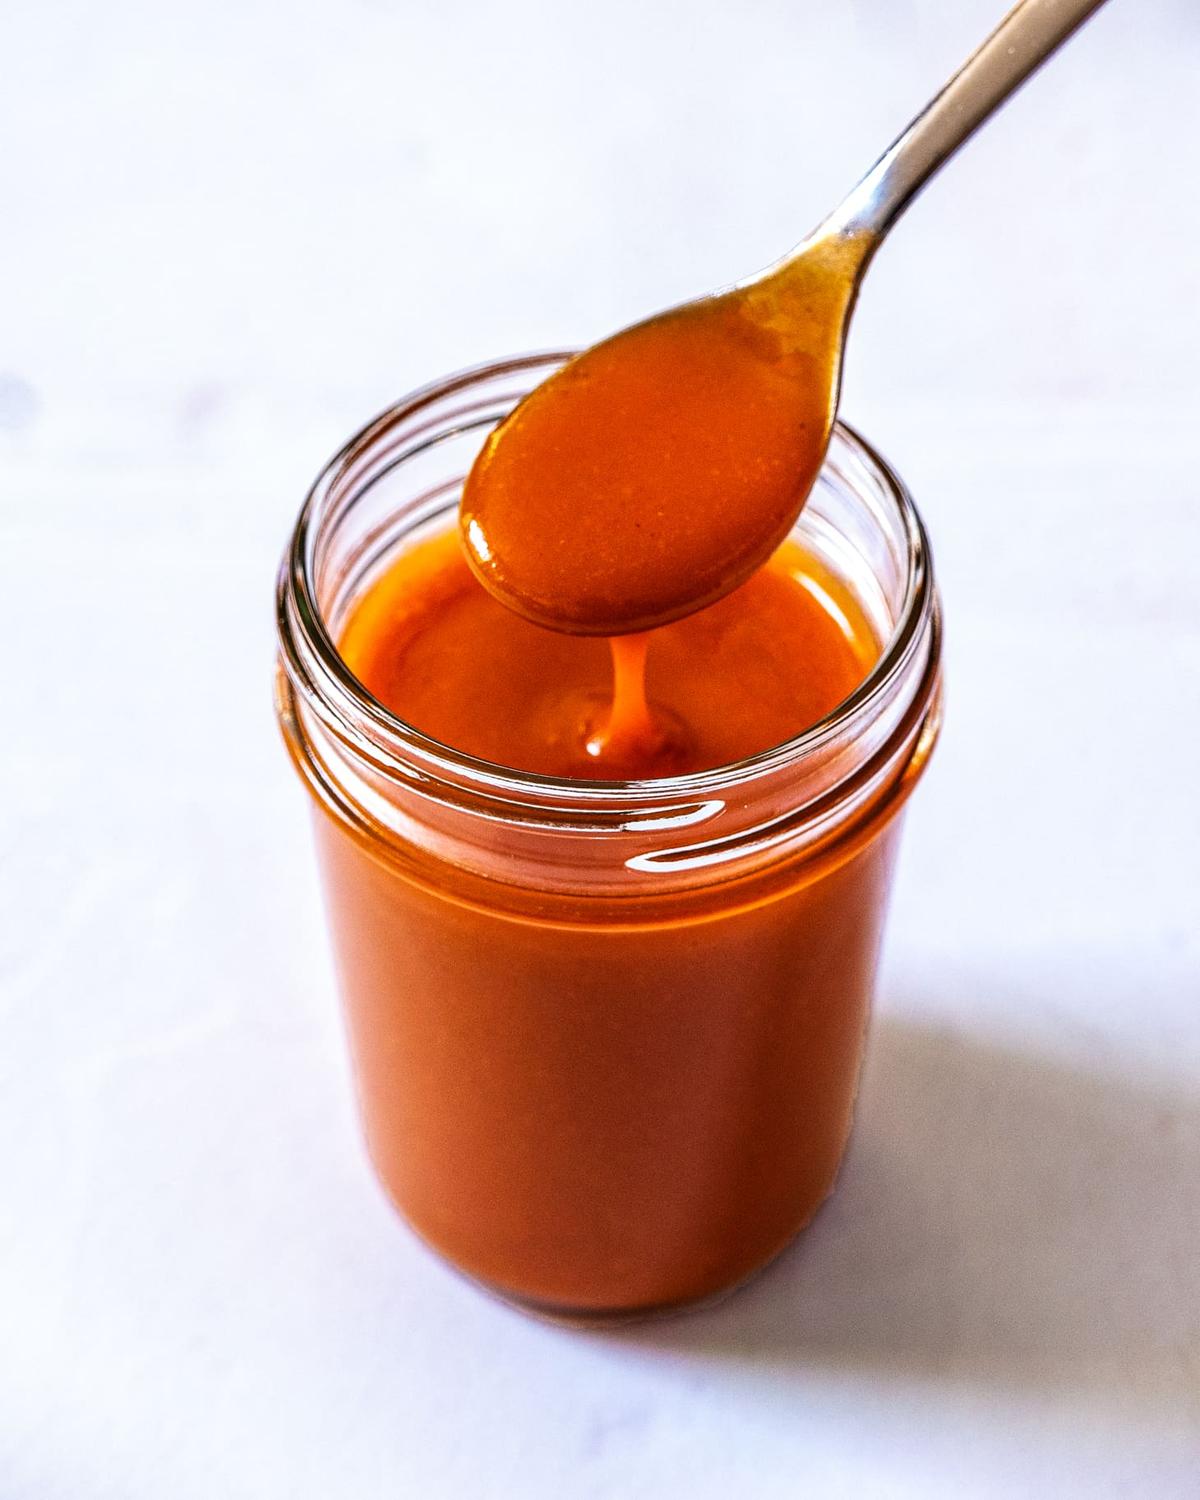 You can whip up this classic French dressing in minutes with ingredients you probably already have in your fridge and pantry. (Perry Santanachote/TNS)